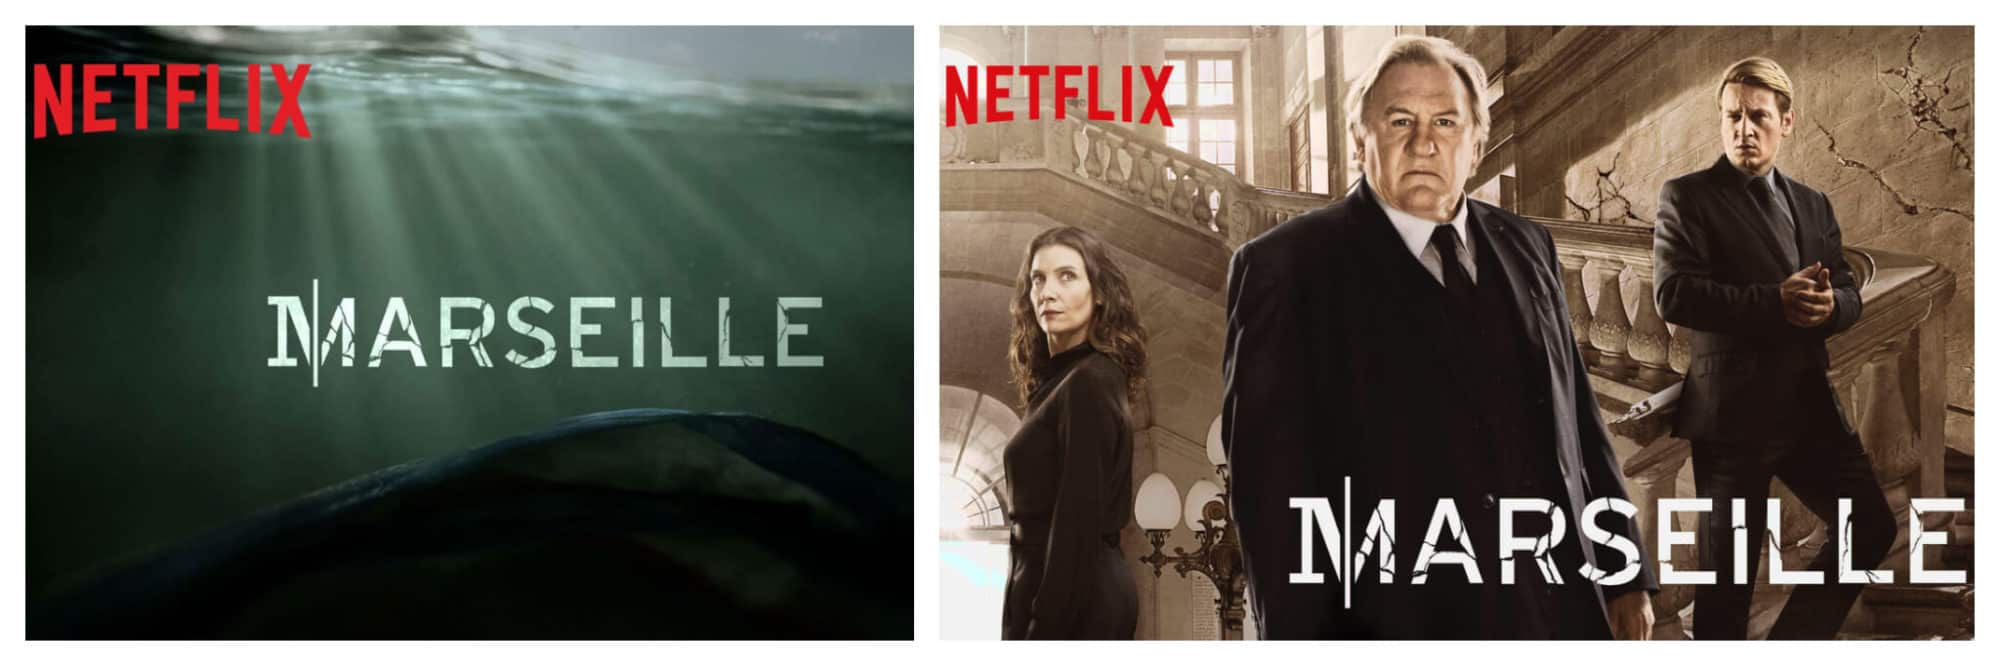 Left and right, posters for French Netflix series Marseille with Gérard Depardieu, the perfect antidote to staying at home while on lockdown.